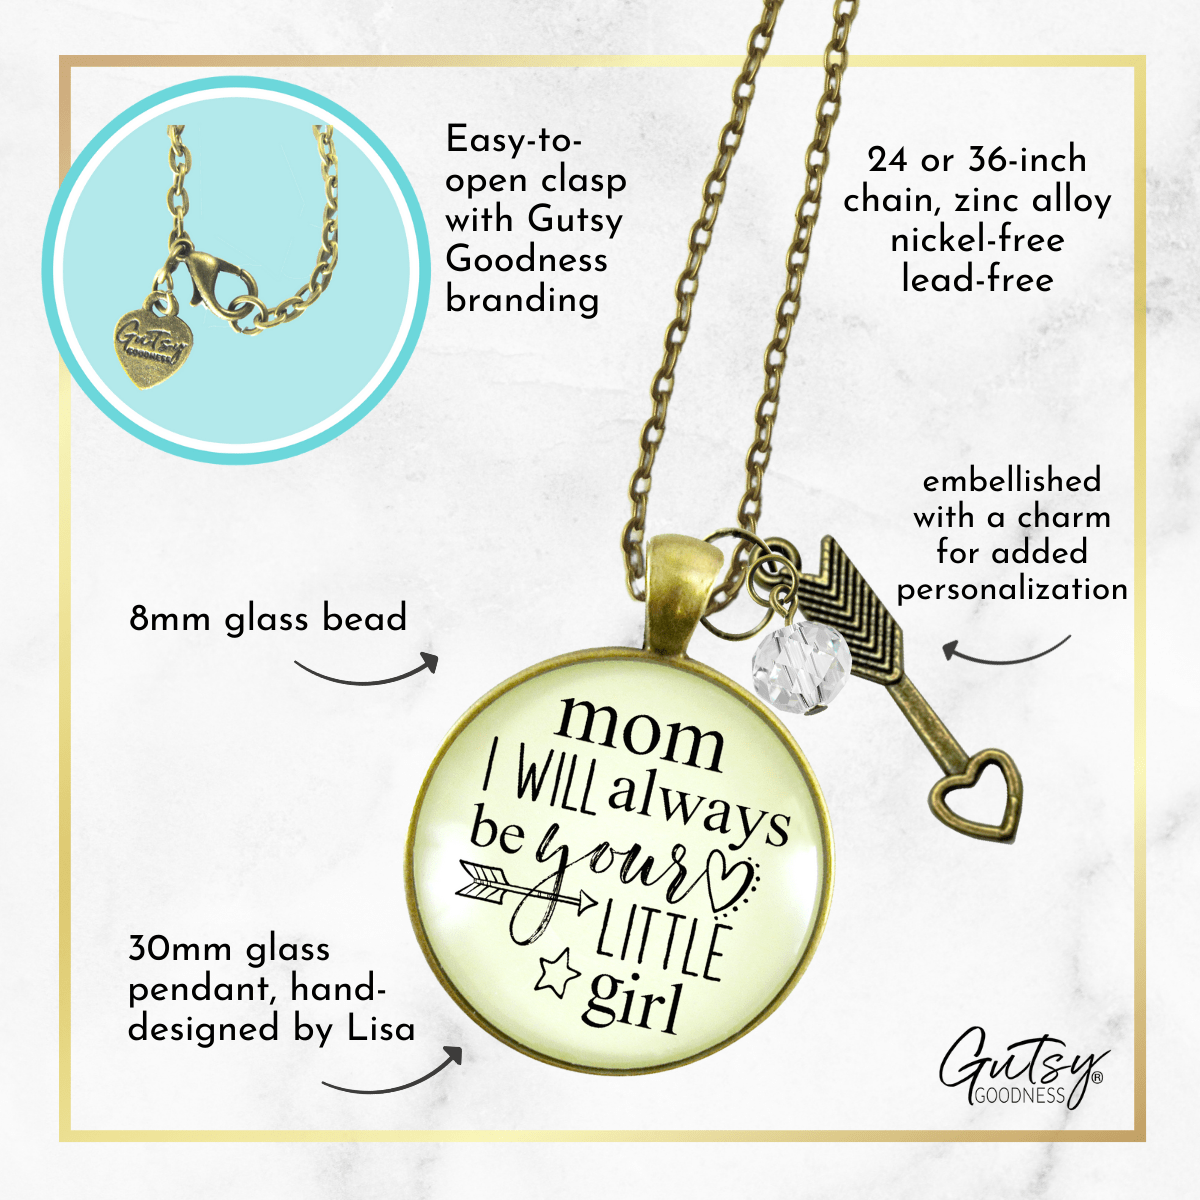 Gutsy Goodness To My Mom Necklace Always Be Daughter Meaningful Heartfelt Mother Jewelry Gift - Gutsy Goodness Handmade Jewelry;To My Mom Necklace Always Be Daughter Meaningful Heartfelt Mother Jewelry Gift - Gutsy Goodness Handmade Jewelry Gifts